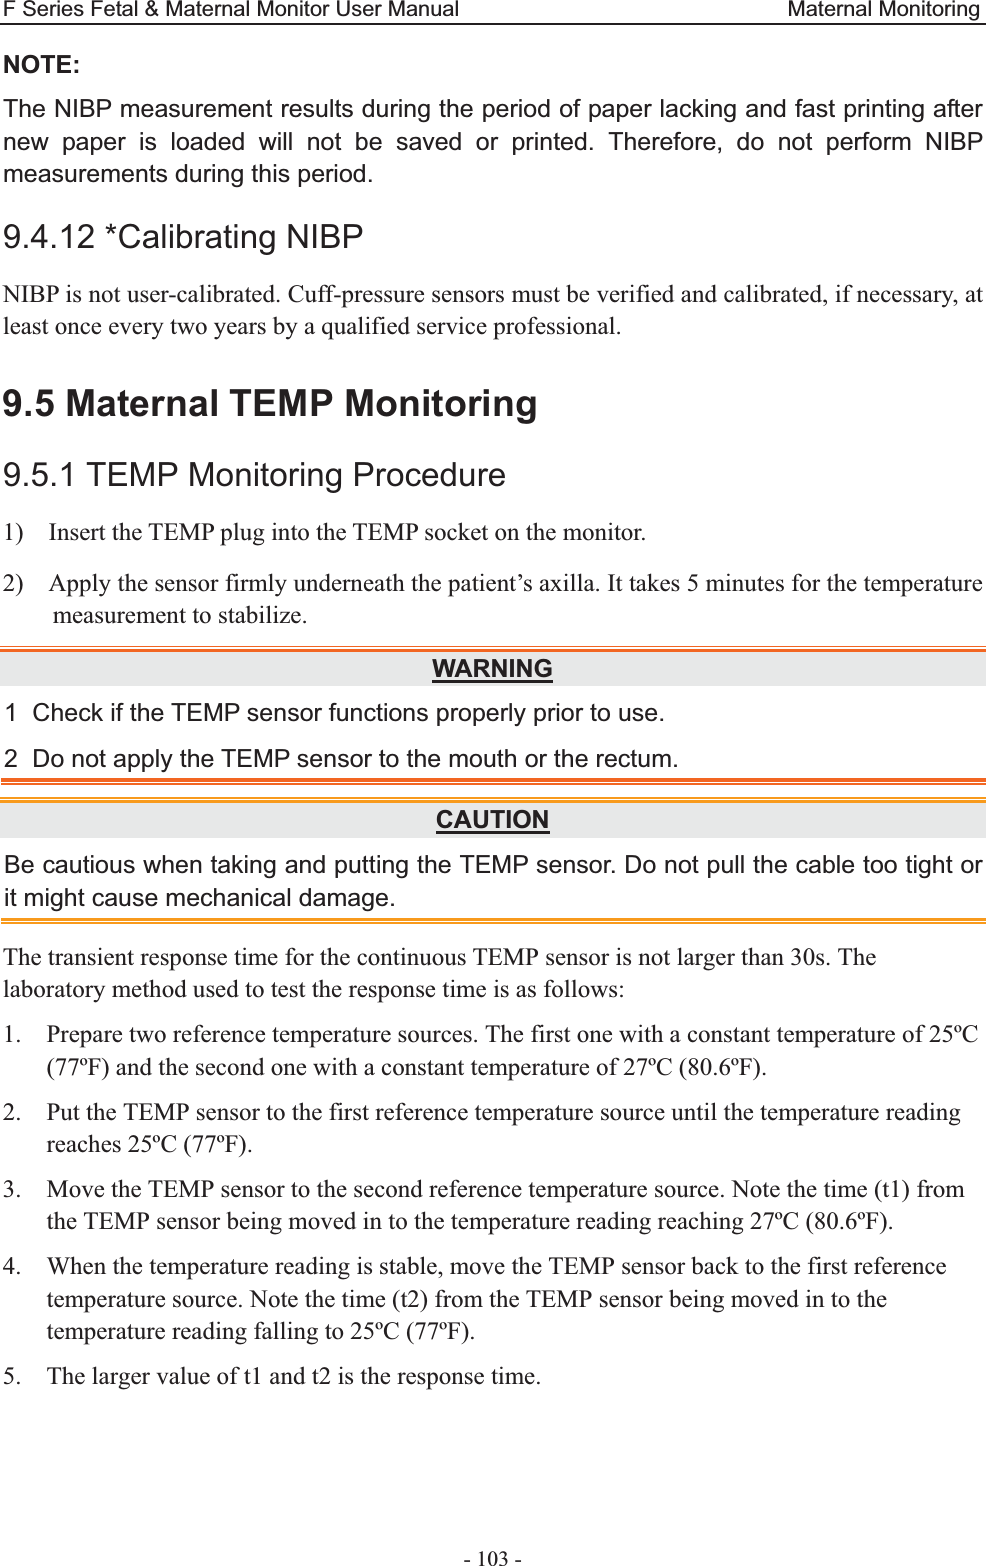 F Series Fetal &amp; Maternal Monitor User Manual                              Maternal Monitoring - 103 - NOTE:The NIBP measurement results during the period of paper lacking and fast printing after new paper is loaded will not be saved or printed. Therefore, do not perform NIBP measurements during this period. 9.4.12 *Calibrating NIBP NIBP is not user-calibrated. Cuff-pressure sensors must be verified and calibrated, if necessary, at least once every two years by a qualified service professional.   9.5 Maternal TEMP Monitoring 9.5.1 TEMP Monitoring Procedure 1)    Insert the TEMP plug into the TEMP socket on the monitor. 2)    Apply the sensor firmly underneath the patient’s axilla. It takes 5 minutes for the temperature measurement to stabilize. WARNING1  Check if the TEMP sensor functions properly prior to use. 2  Do not apply the TEMP sensor to the mouth or the rectum. CAUTIONBe cautious when taking and putting the TEMP sensor. Do not pull the cable too tight or it might cause mechanical damage. The transient response time for the continuous TEMP sensor is not larger than 30s. The laboratory method used to test the response time is as follows: 1. Prepare two reference temperature sources. The first one with a constant temperature of 25ºC (77ºF) and the second one with a constant temperature of 27ºC (80.6ºF). 2. Put the TEMP sensor to the first reference temperature source until the temperature reading reaches 25ºC (77ºF). 3. Move the TEMP sensor to the second reference temperature source. Note the time (t1) from the TEMP sensor being moved in to the temperature reading reaching 27ºC (80.6ºF). 4. When the temperature reading is stable, move the TEMP sensor back to the first reference temperature source. Note the time (t2) from the TEMP sensor being moved in to the temperature reading falling to 25ºC (77ºF). 5. The larger value of t1 and t2 is the response time.  